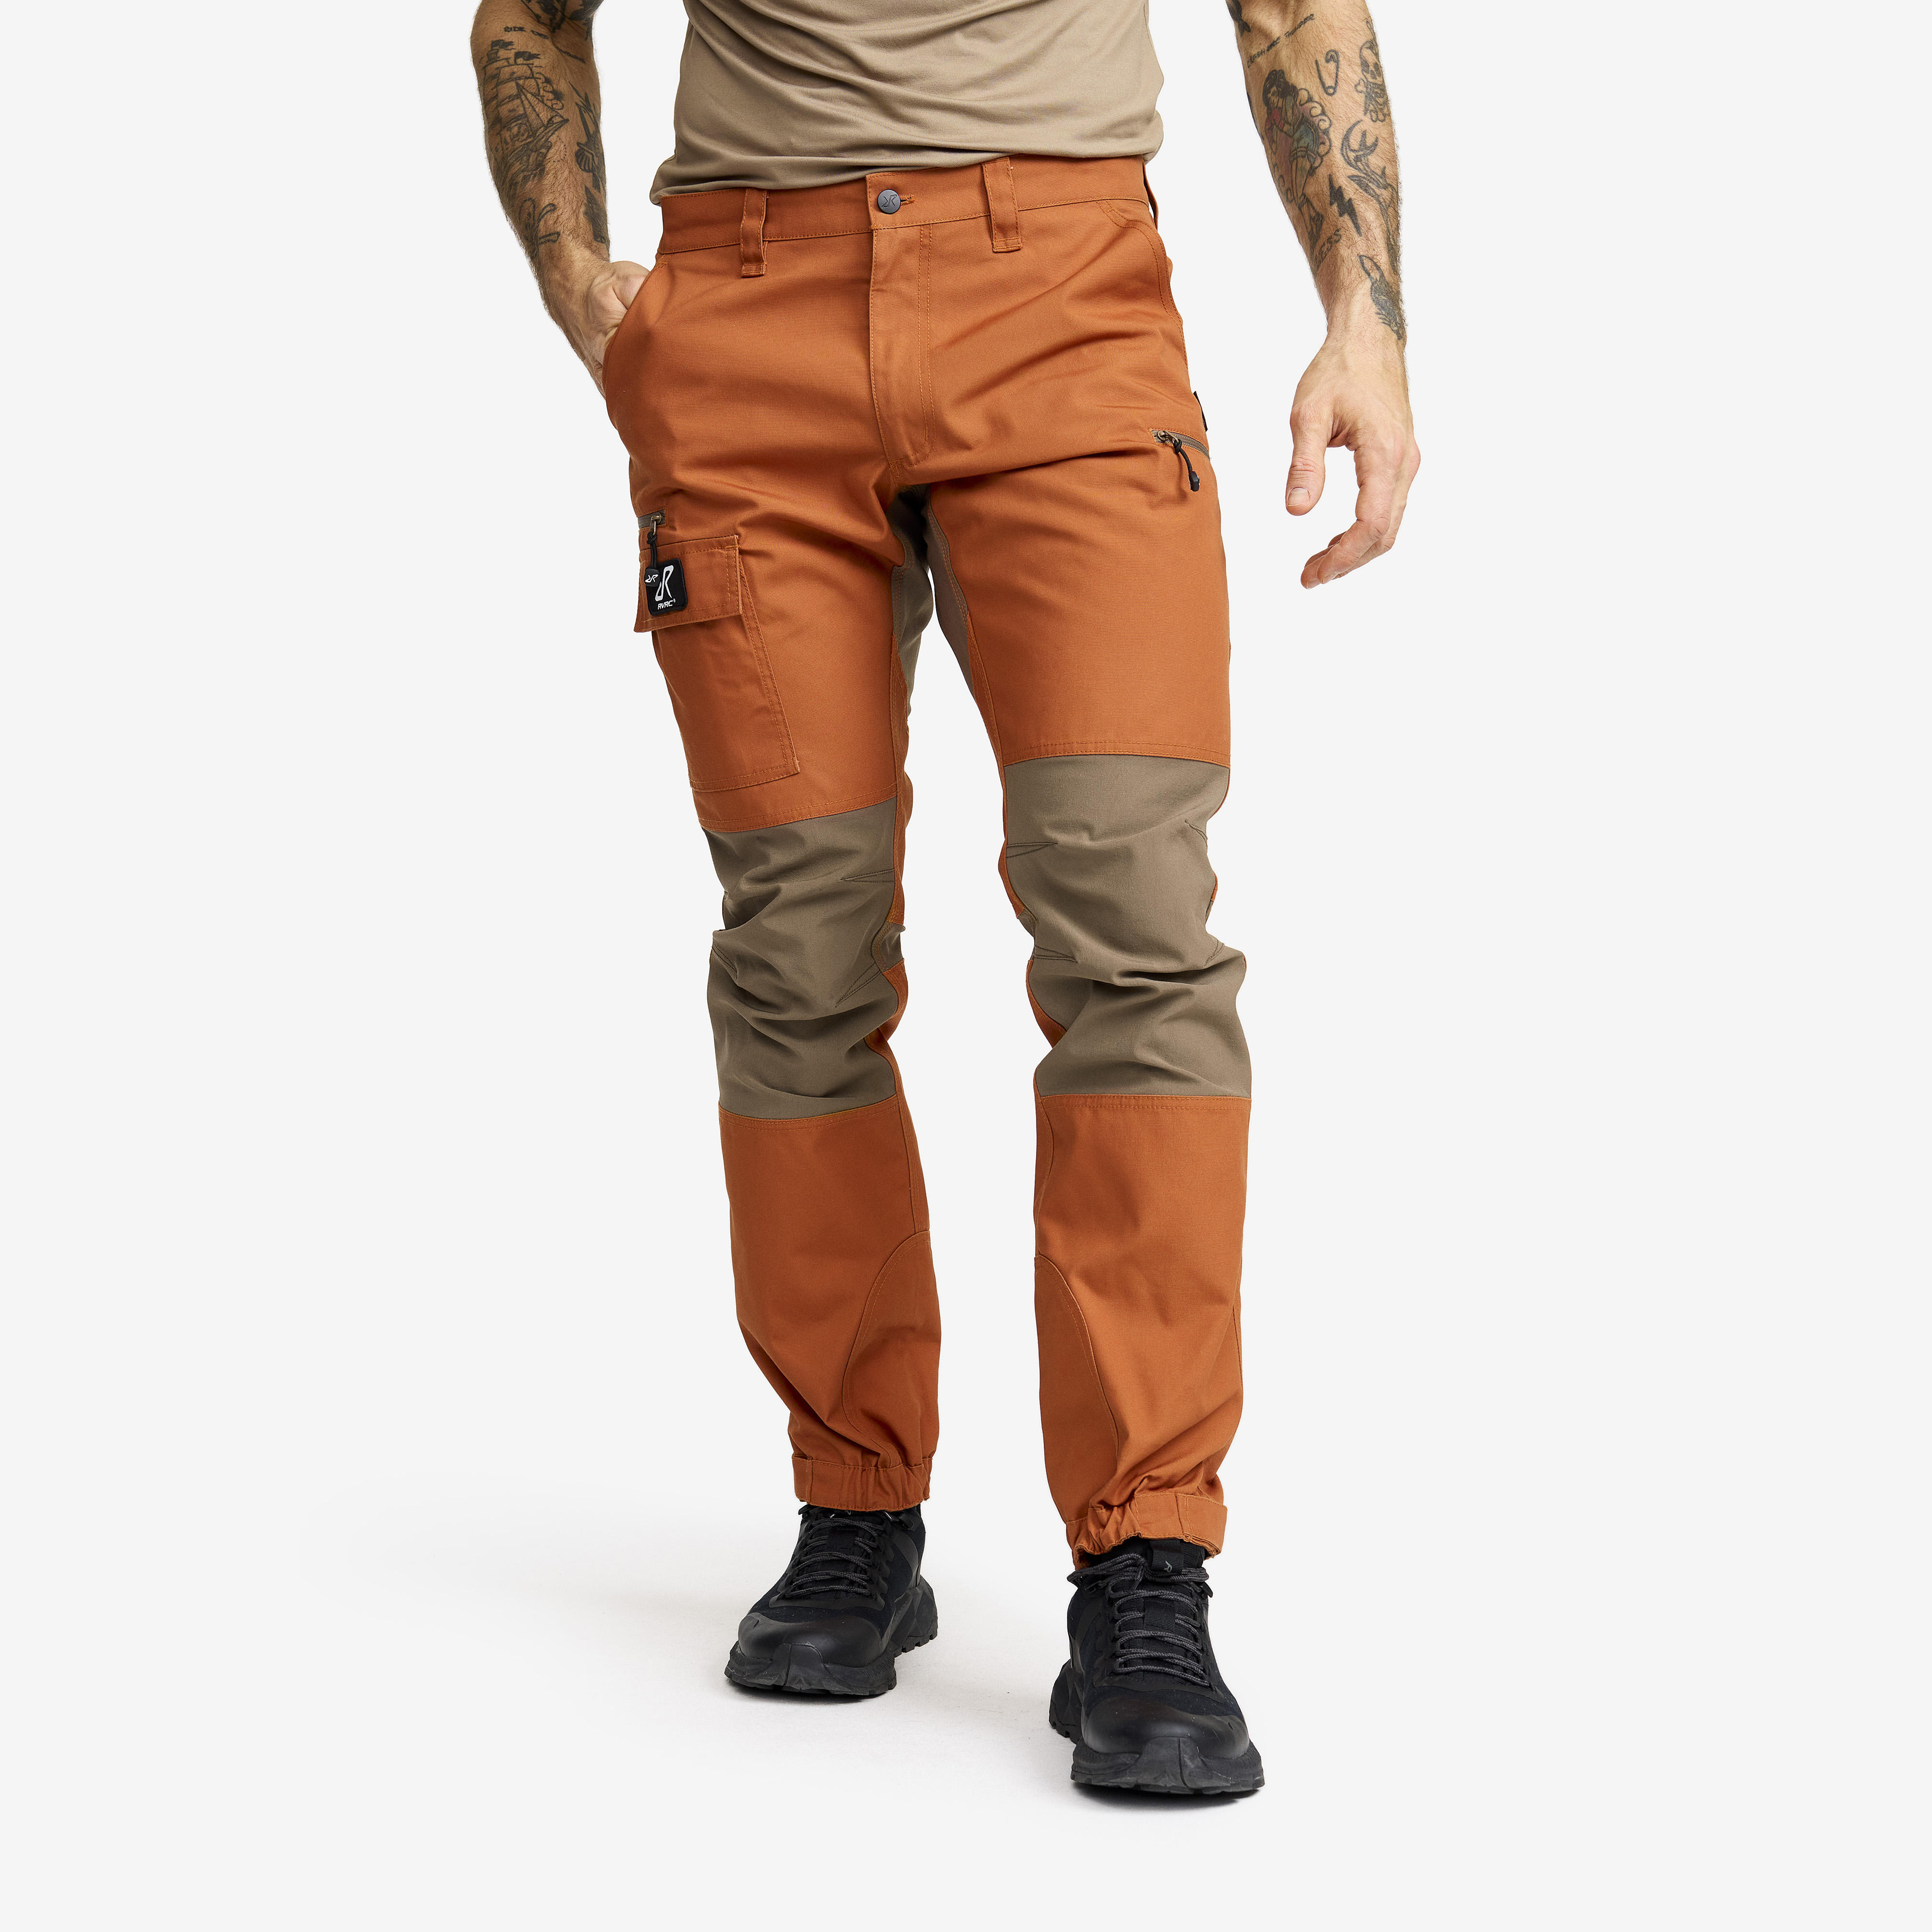 Nordwand Pants Teracotta Brown/chocolate Chip Men